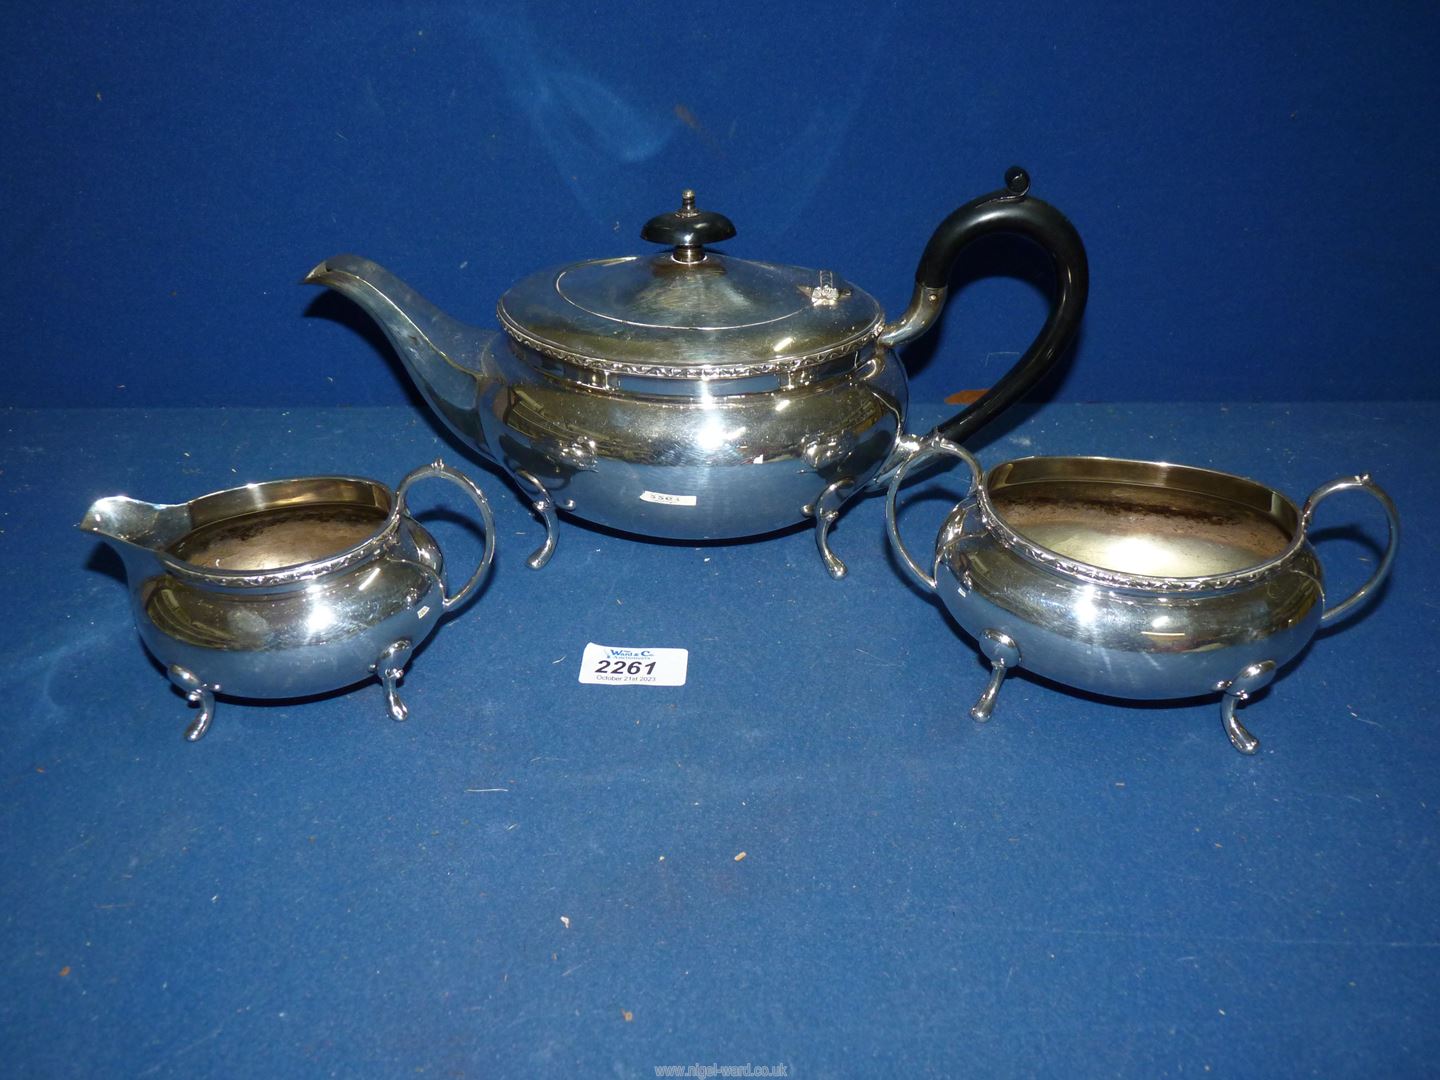 An Epns Teaset including teapot with Bakelite finial and handle, milk jug and sugar bowl.